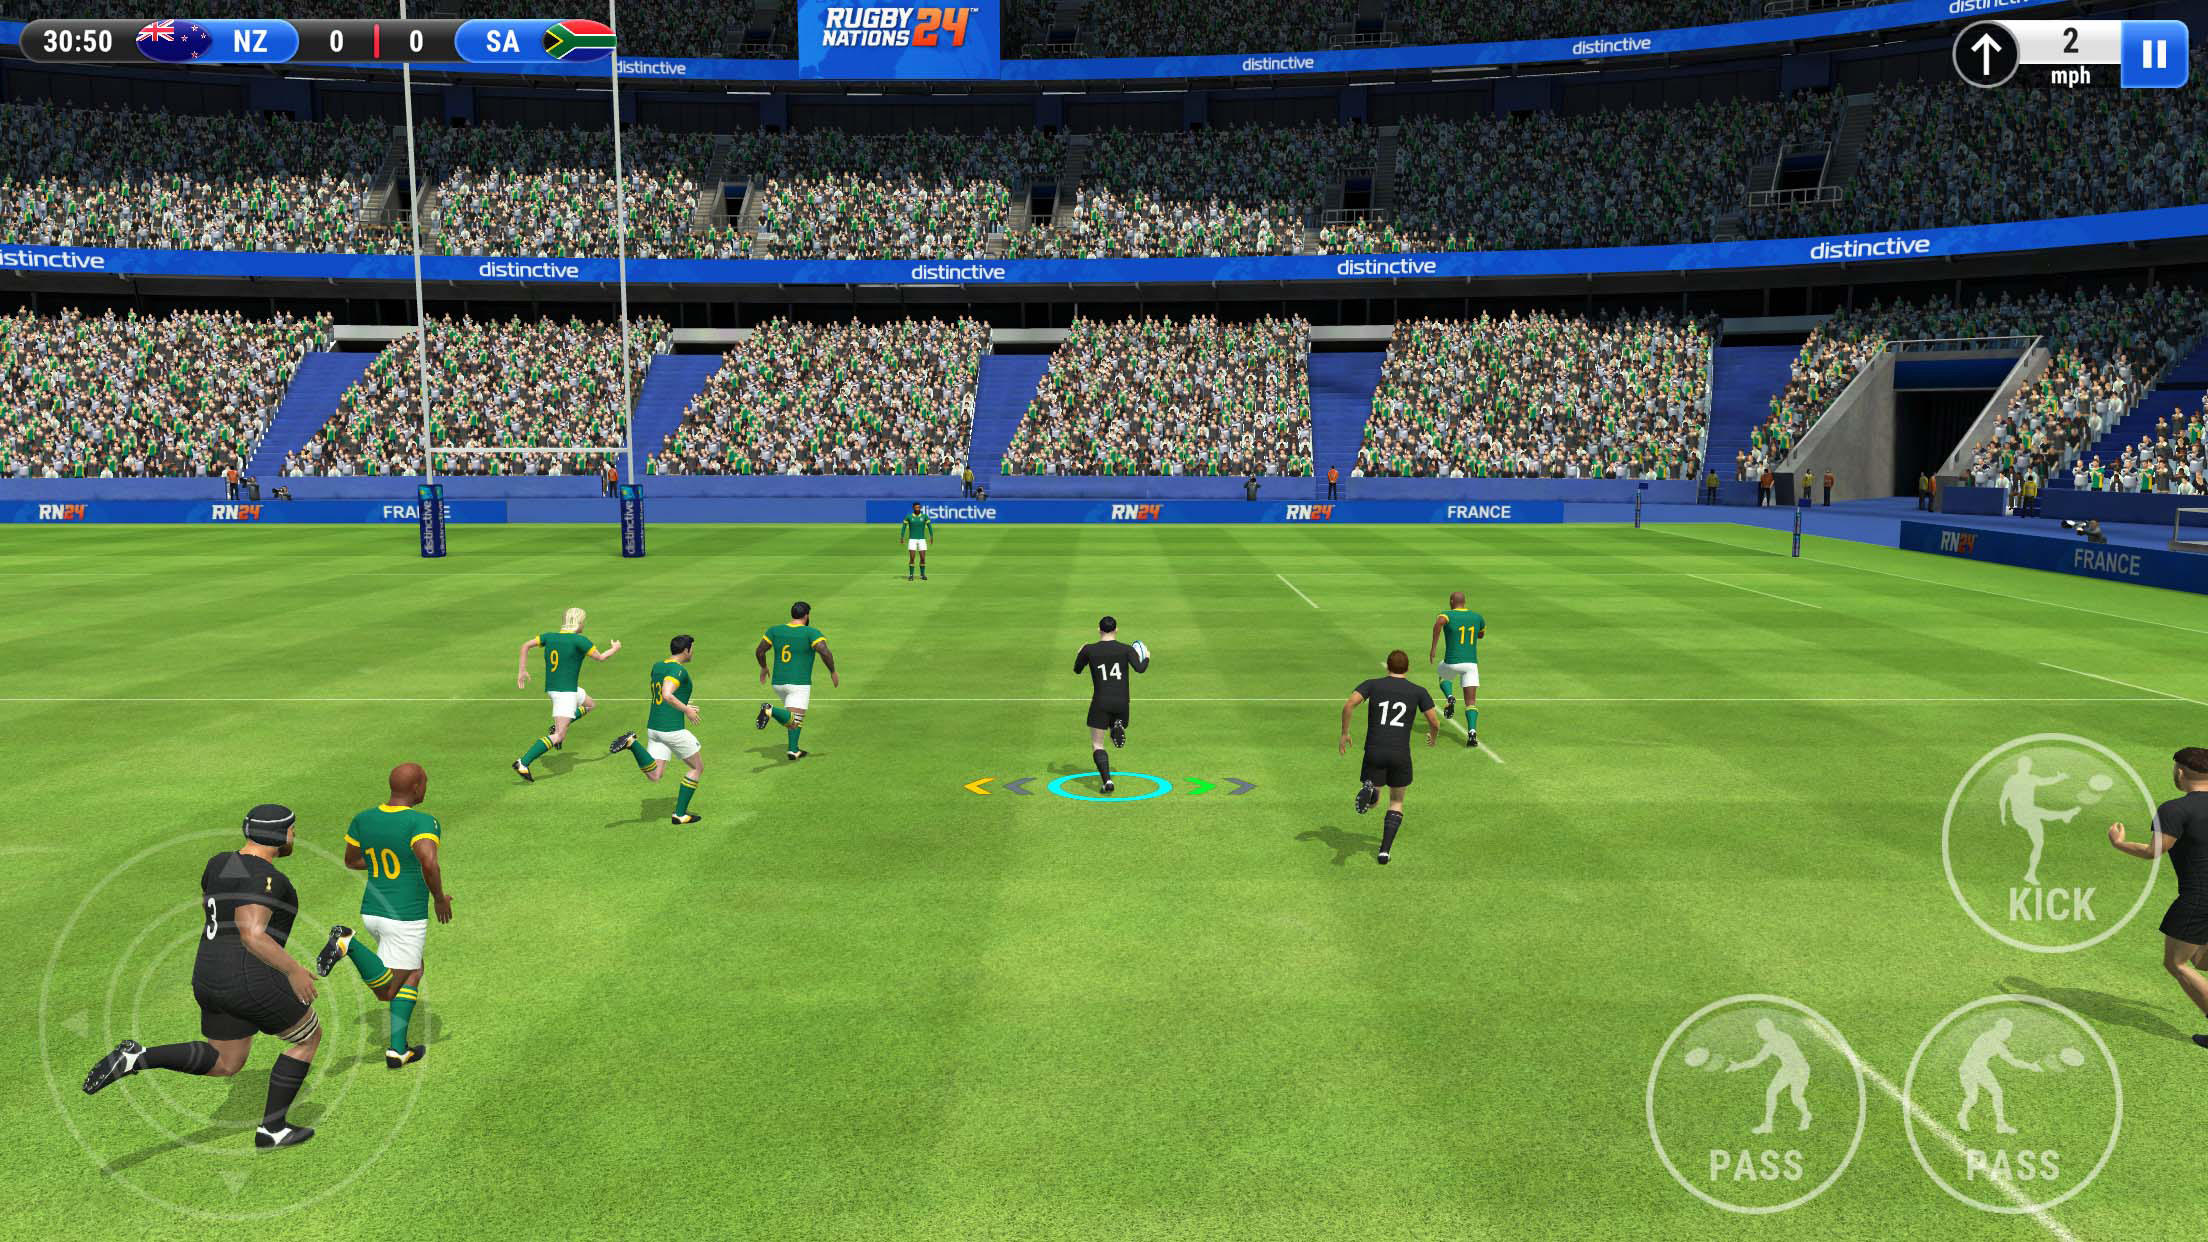 Screenshot of Rugby Nations 24